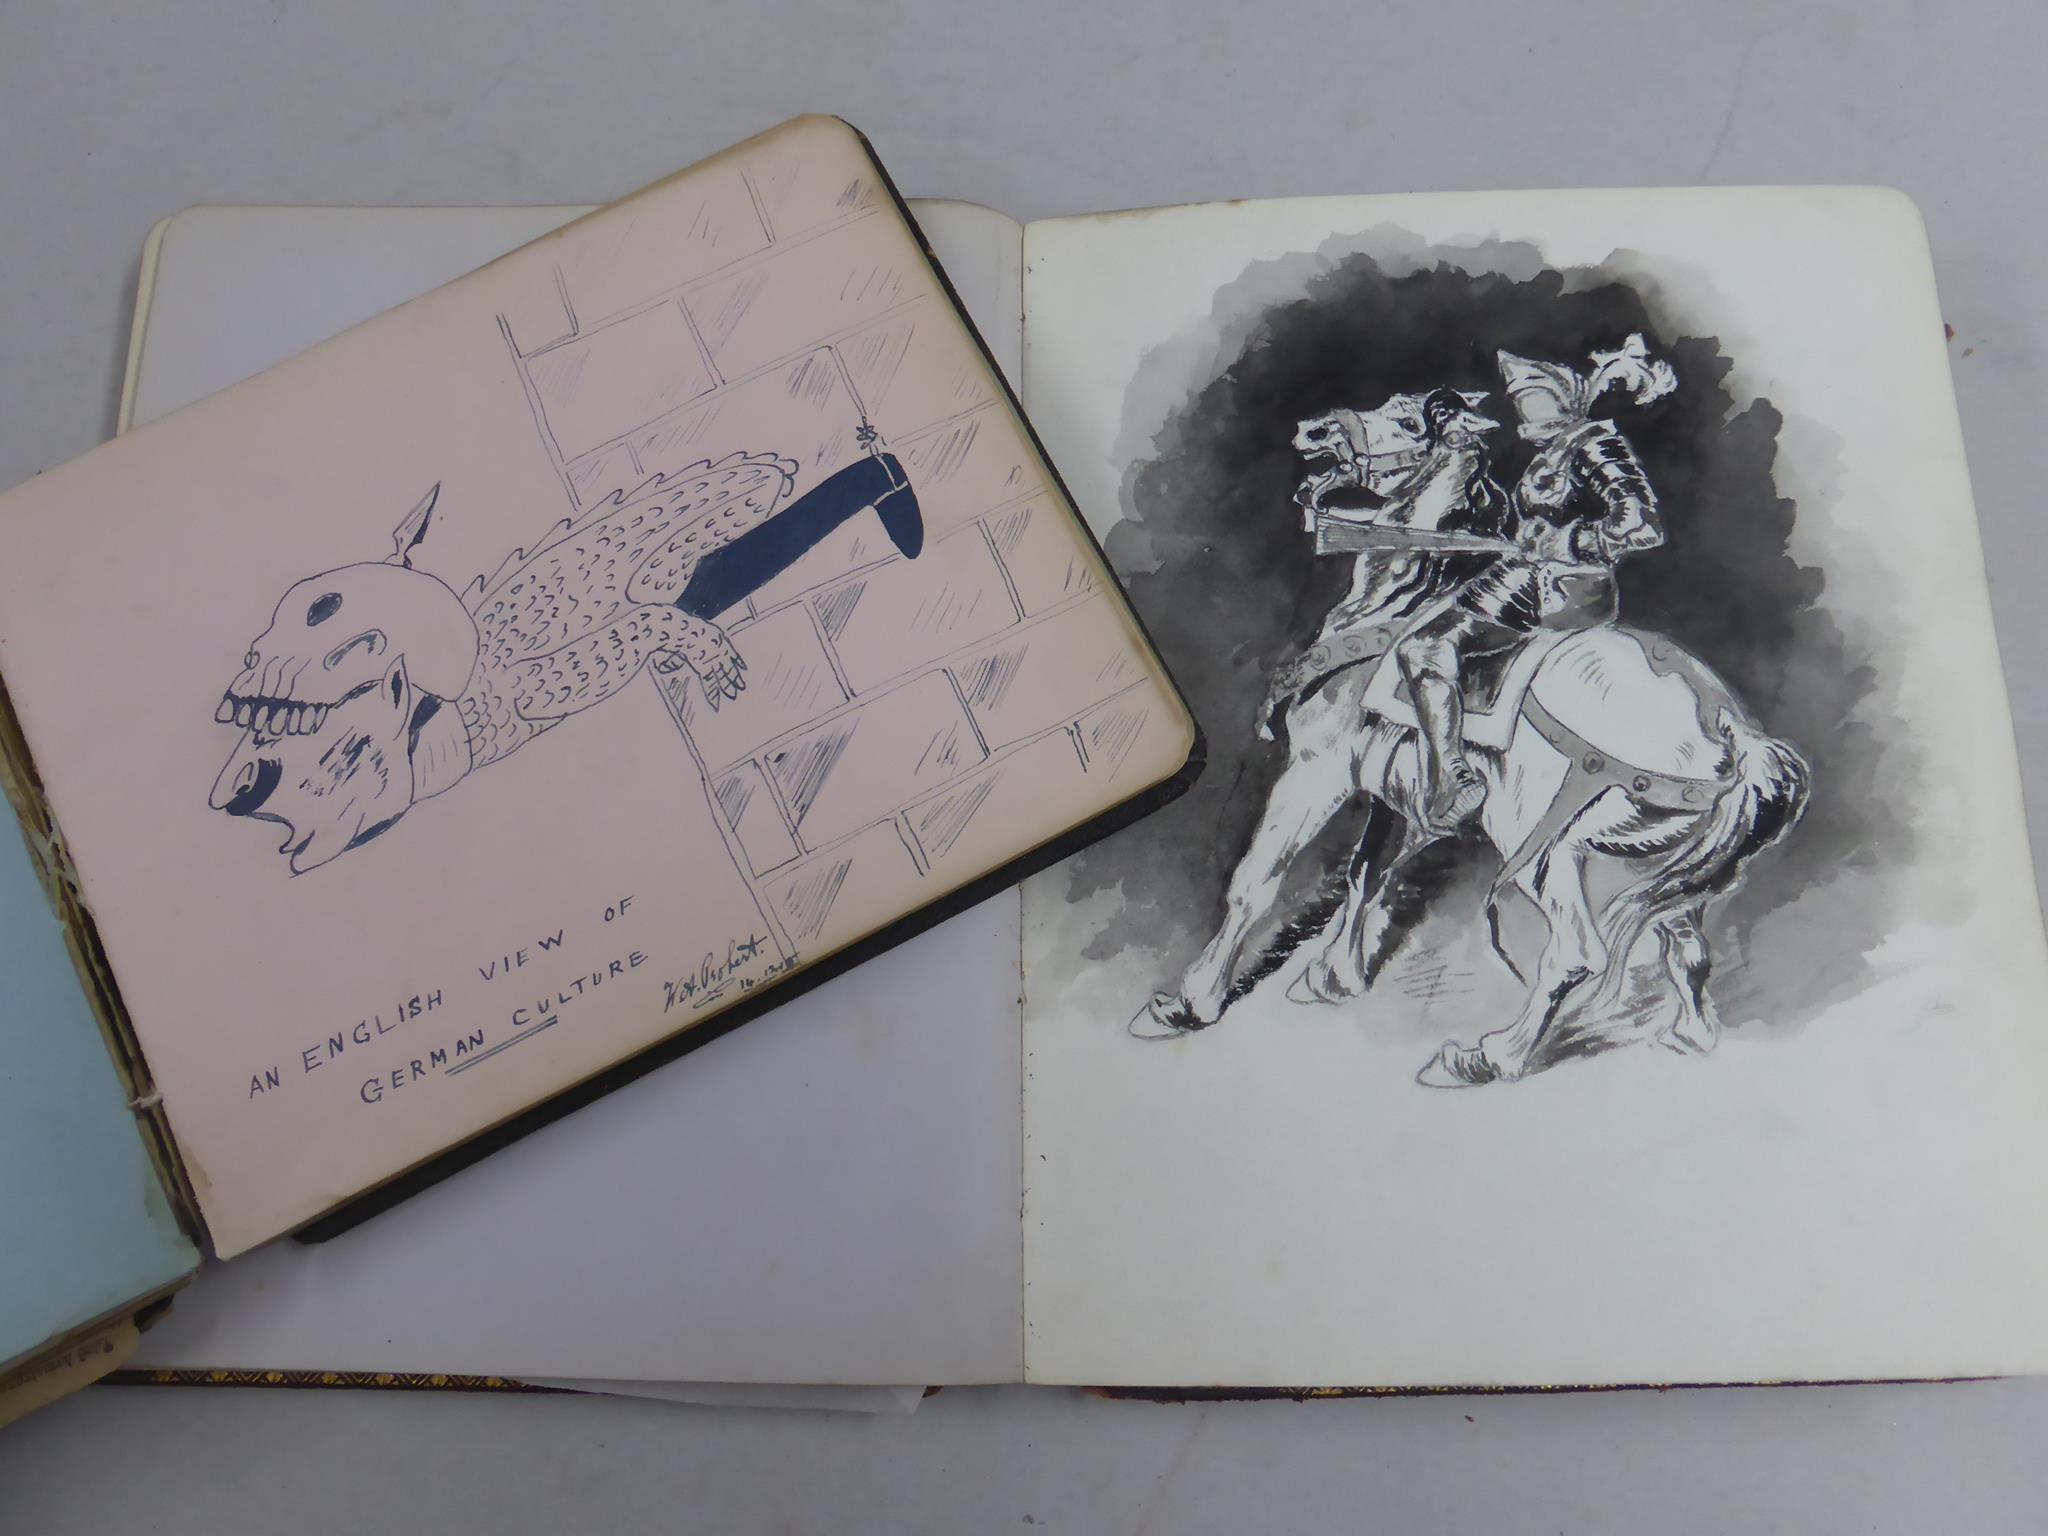 MISC. SKETCH BOOKS AND AUTOGRAPH BOOKS DATING FROM WWI ERA - Image 5 of 5